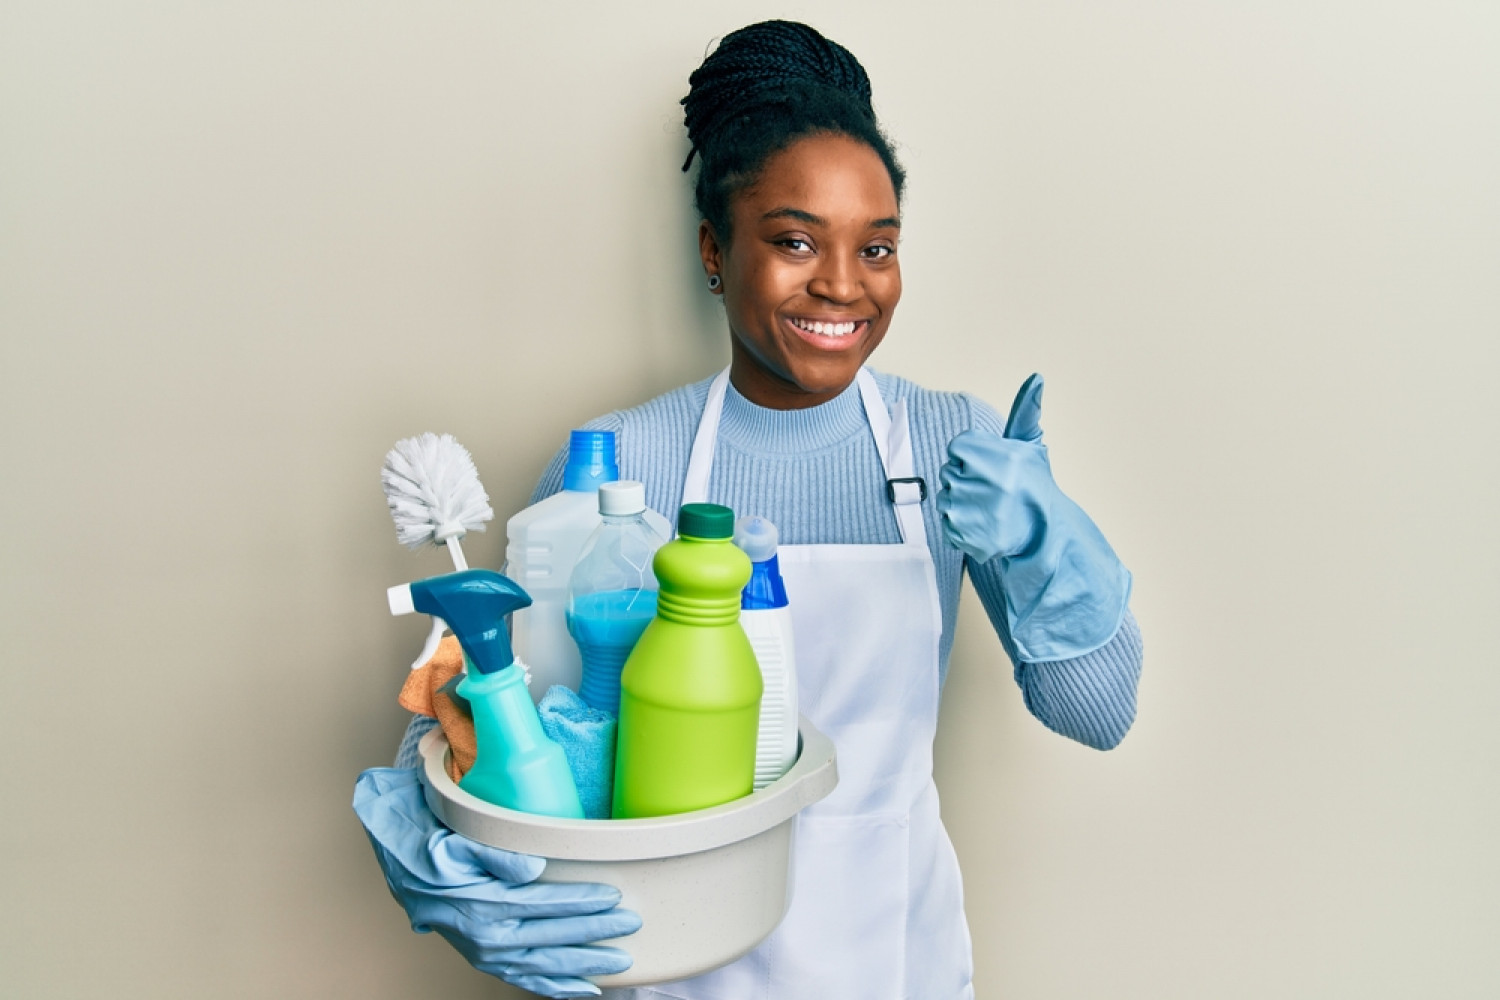 A Guide on Starting a Cleaning Business